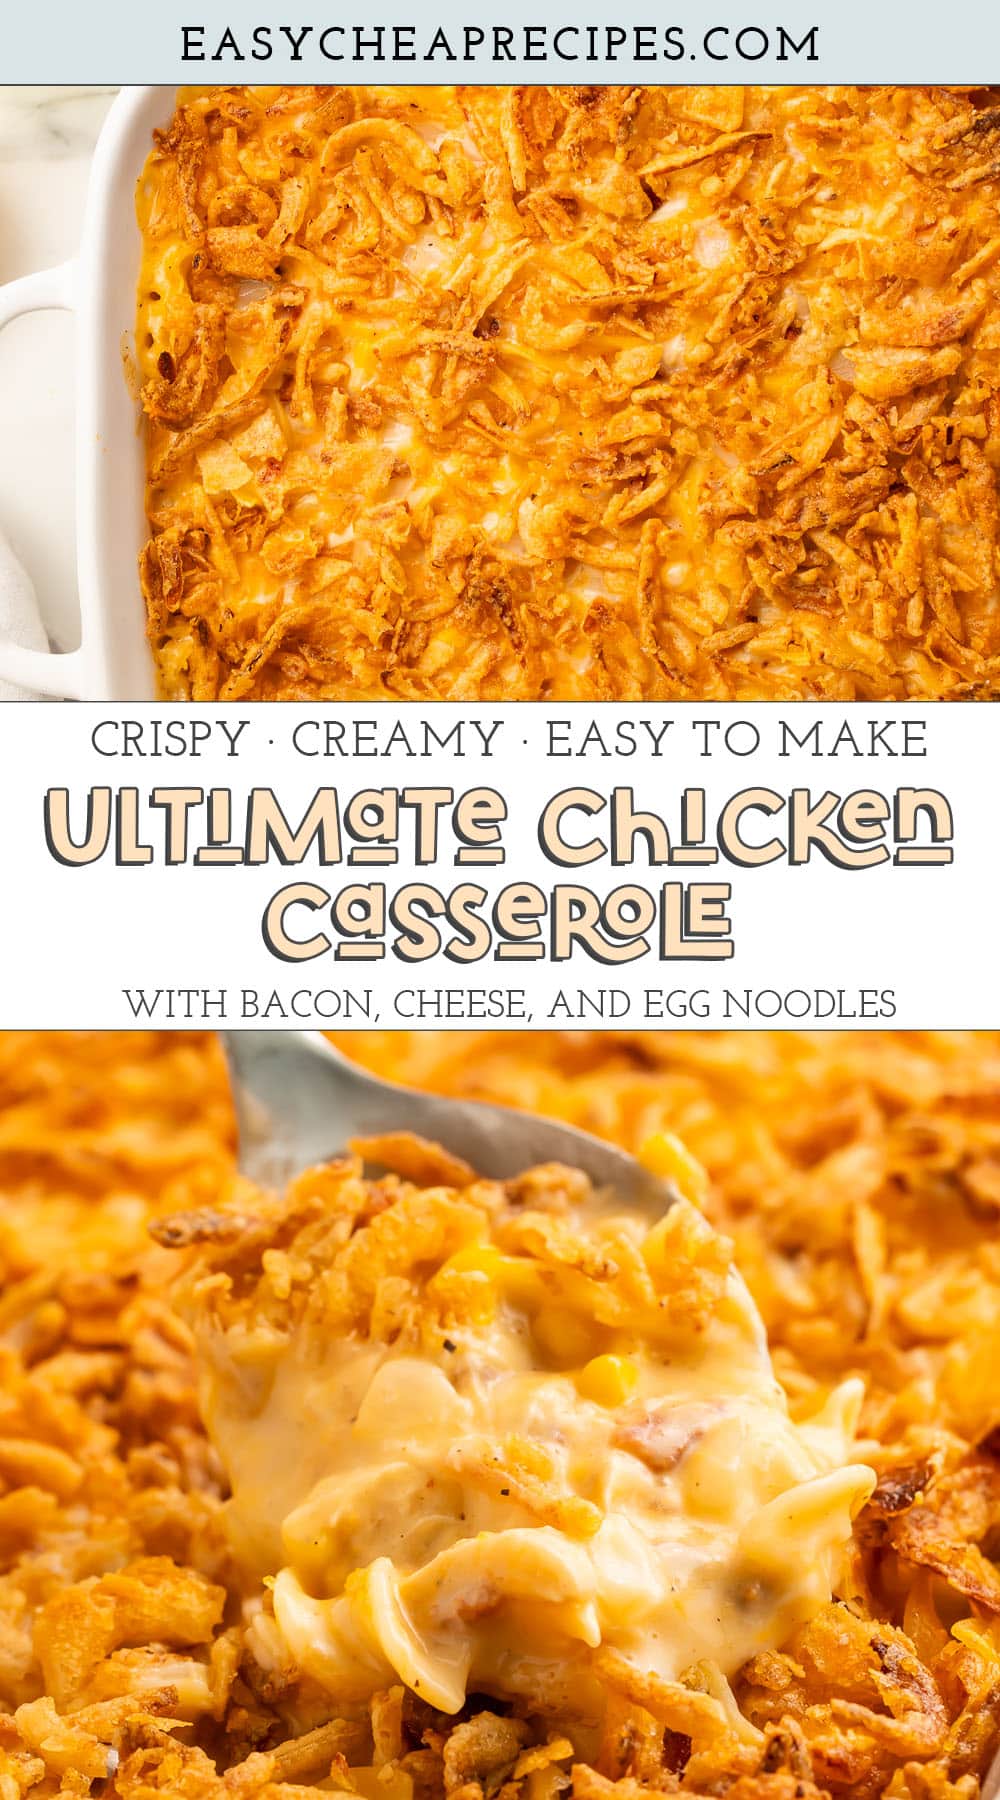 Pin graphic for ultimate chicken casserole.